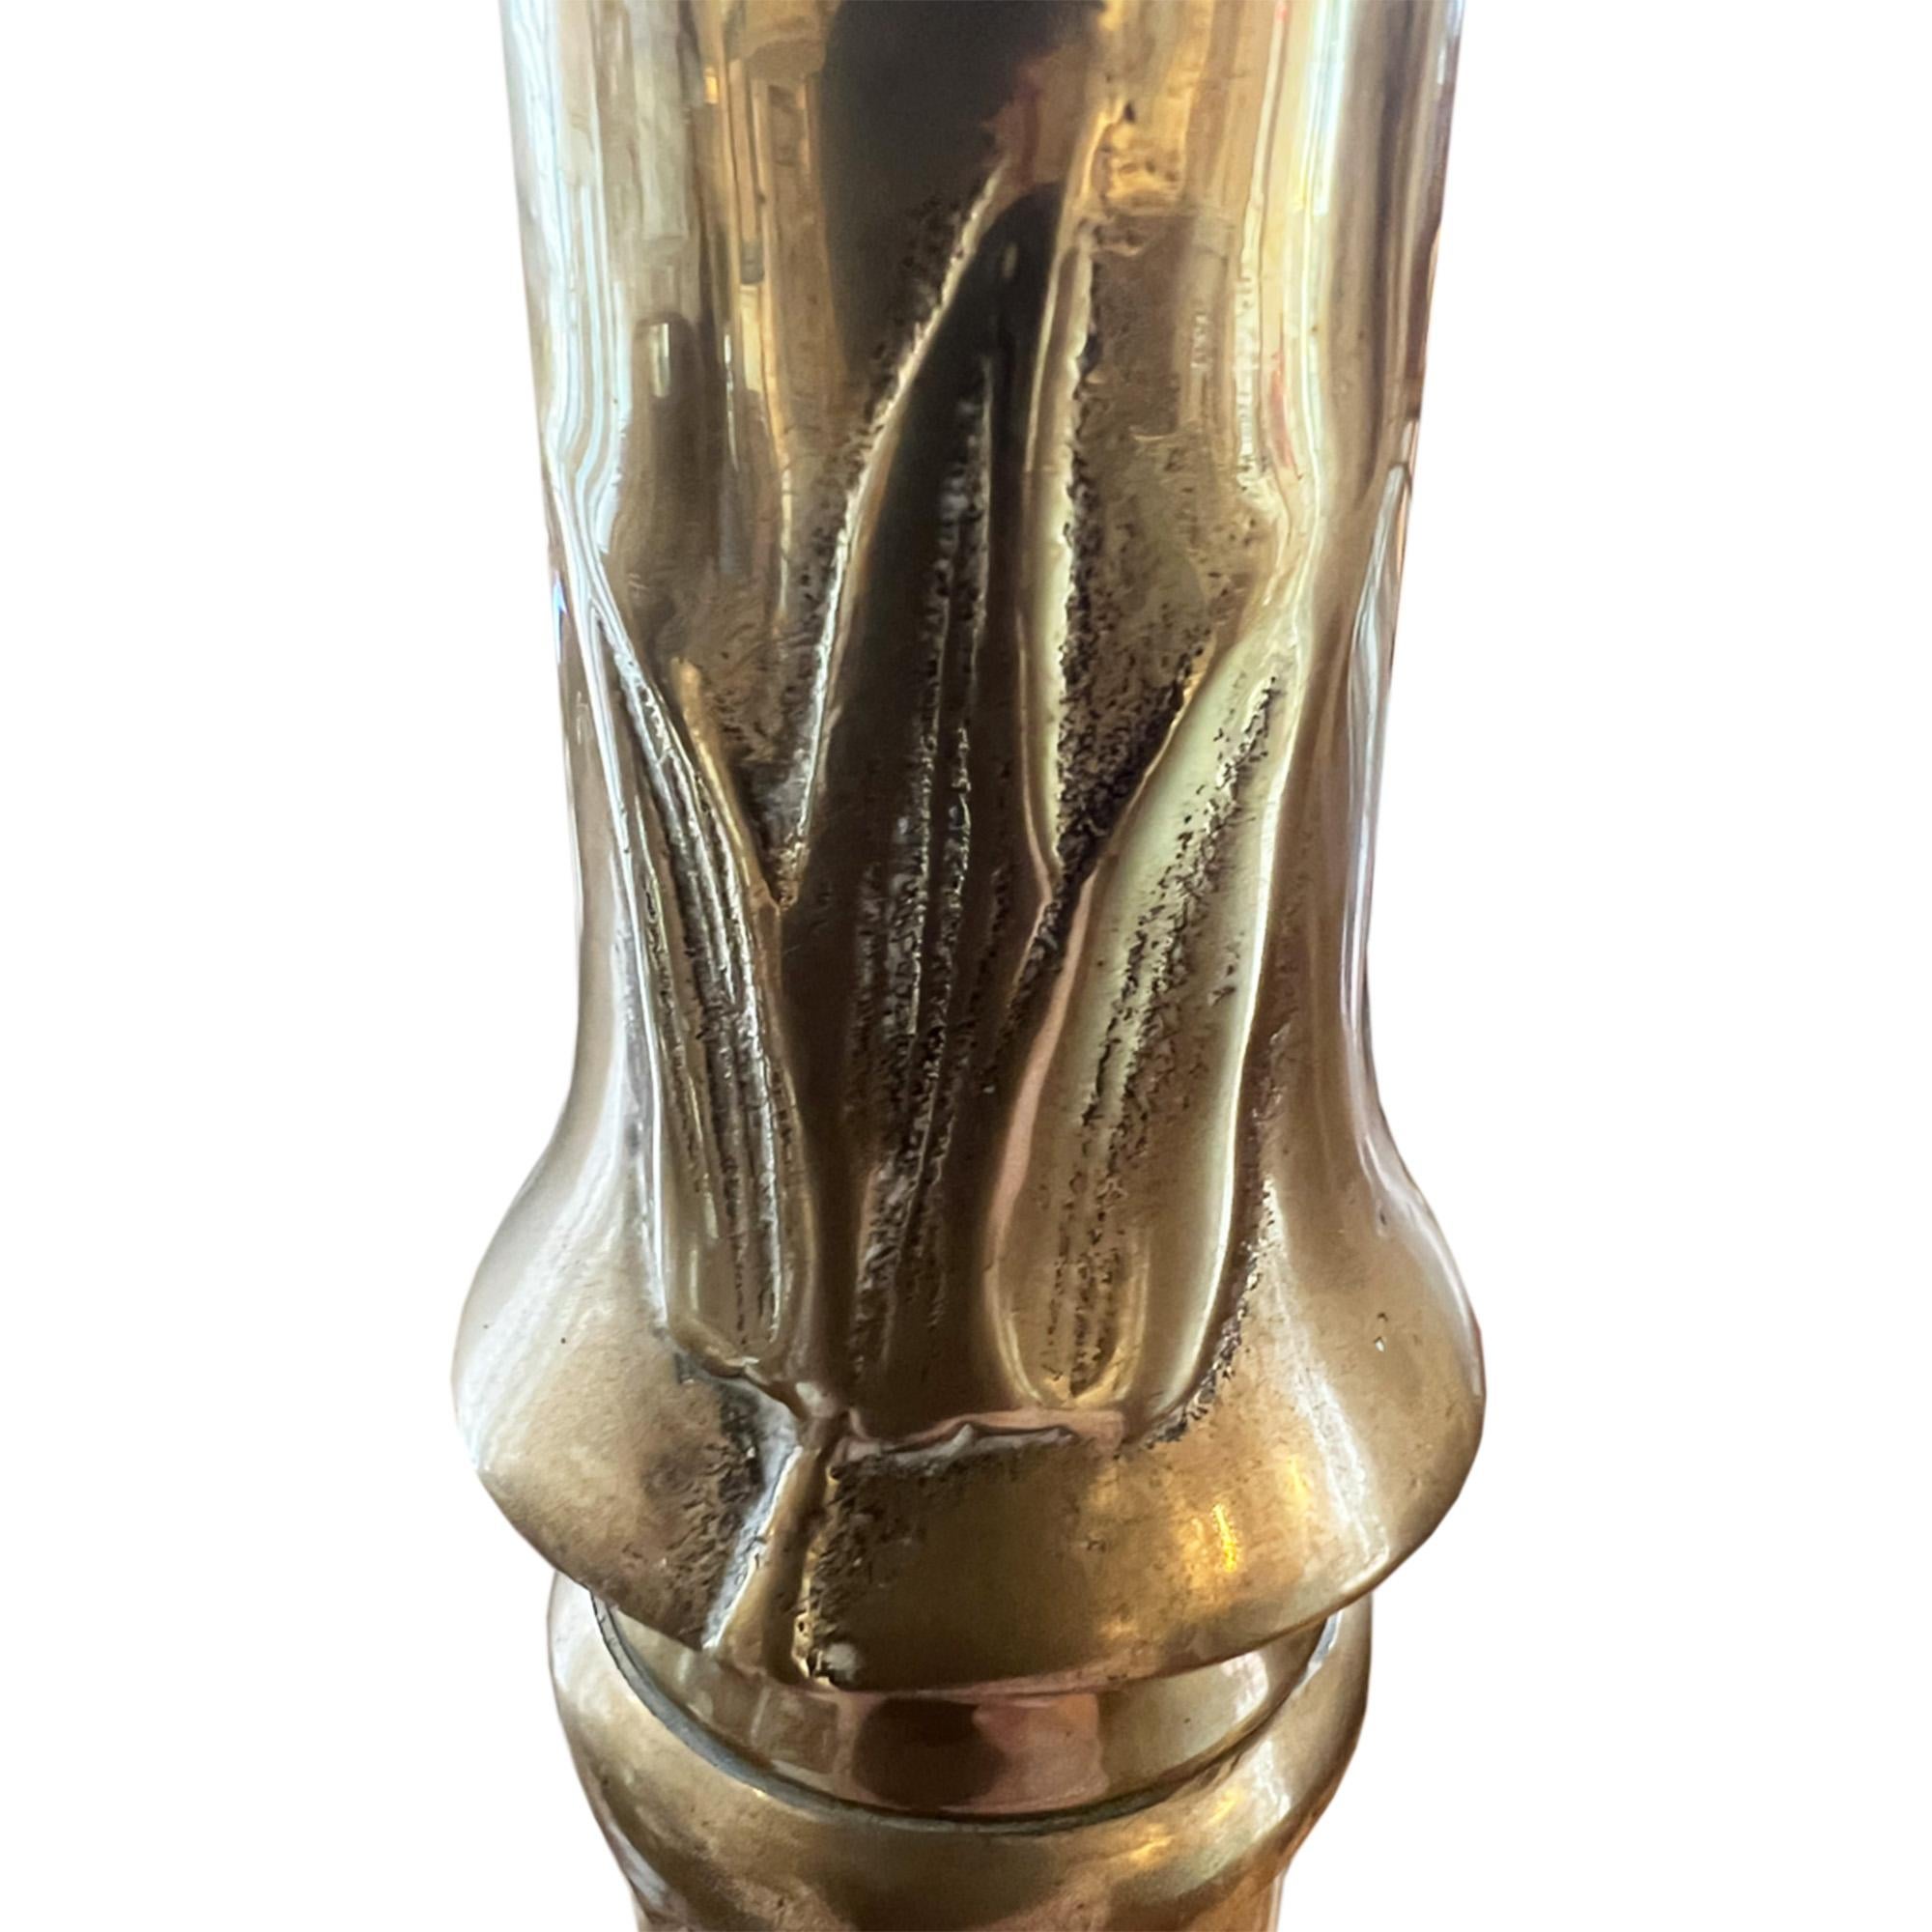 This is a great brass midcentury floor lamp -  which detailed faux bamboo decoration which extends down to the base.

Made in France it is elegant, as well as being solid and sturdy. 

We've had it rewired by our electrician for the UK with twisted